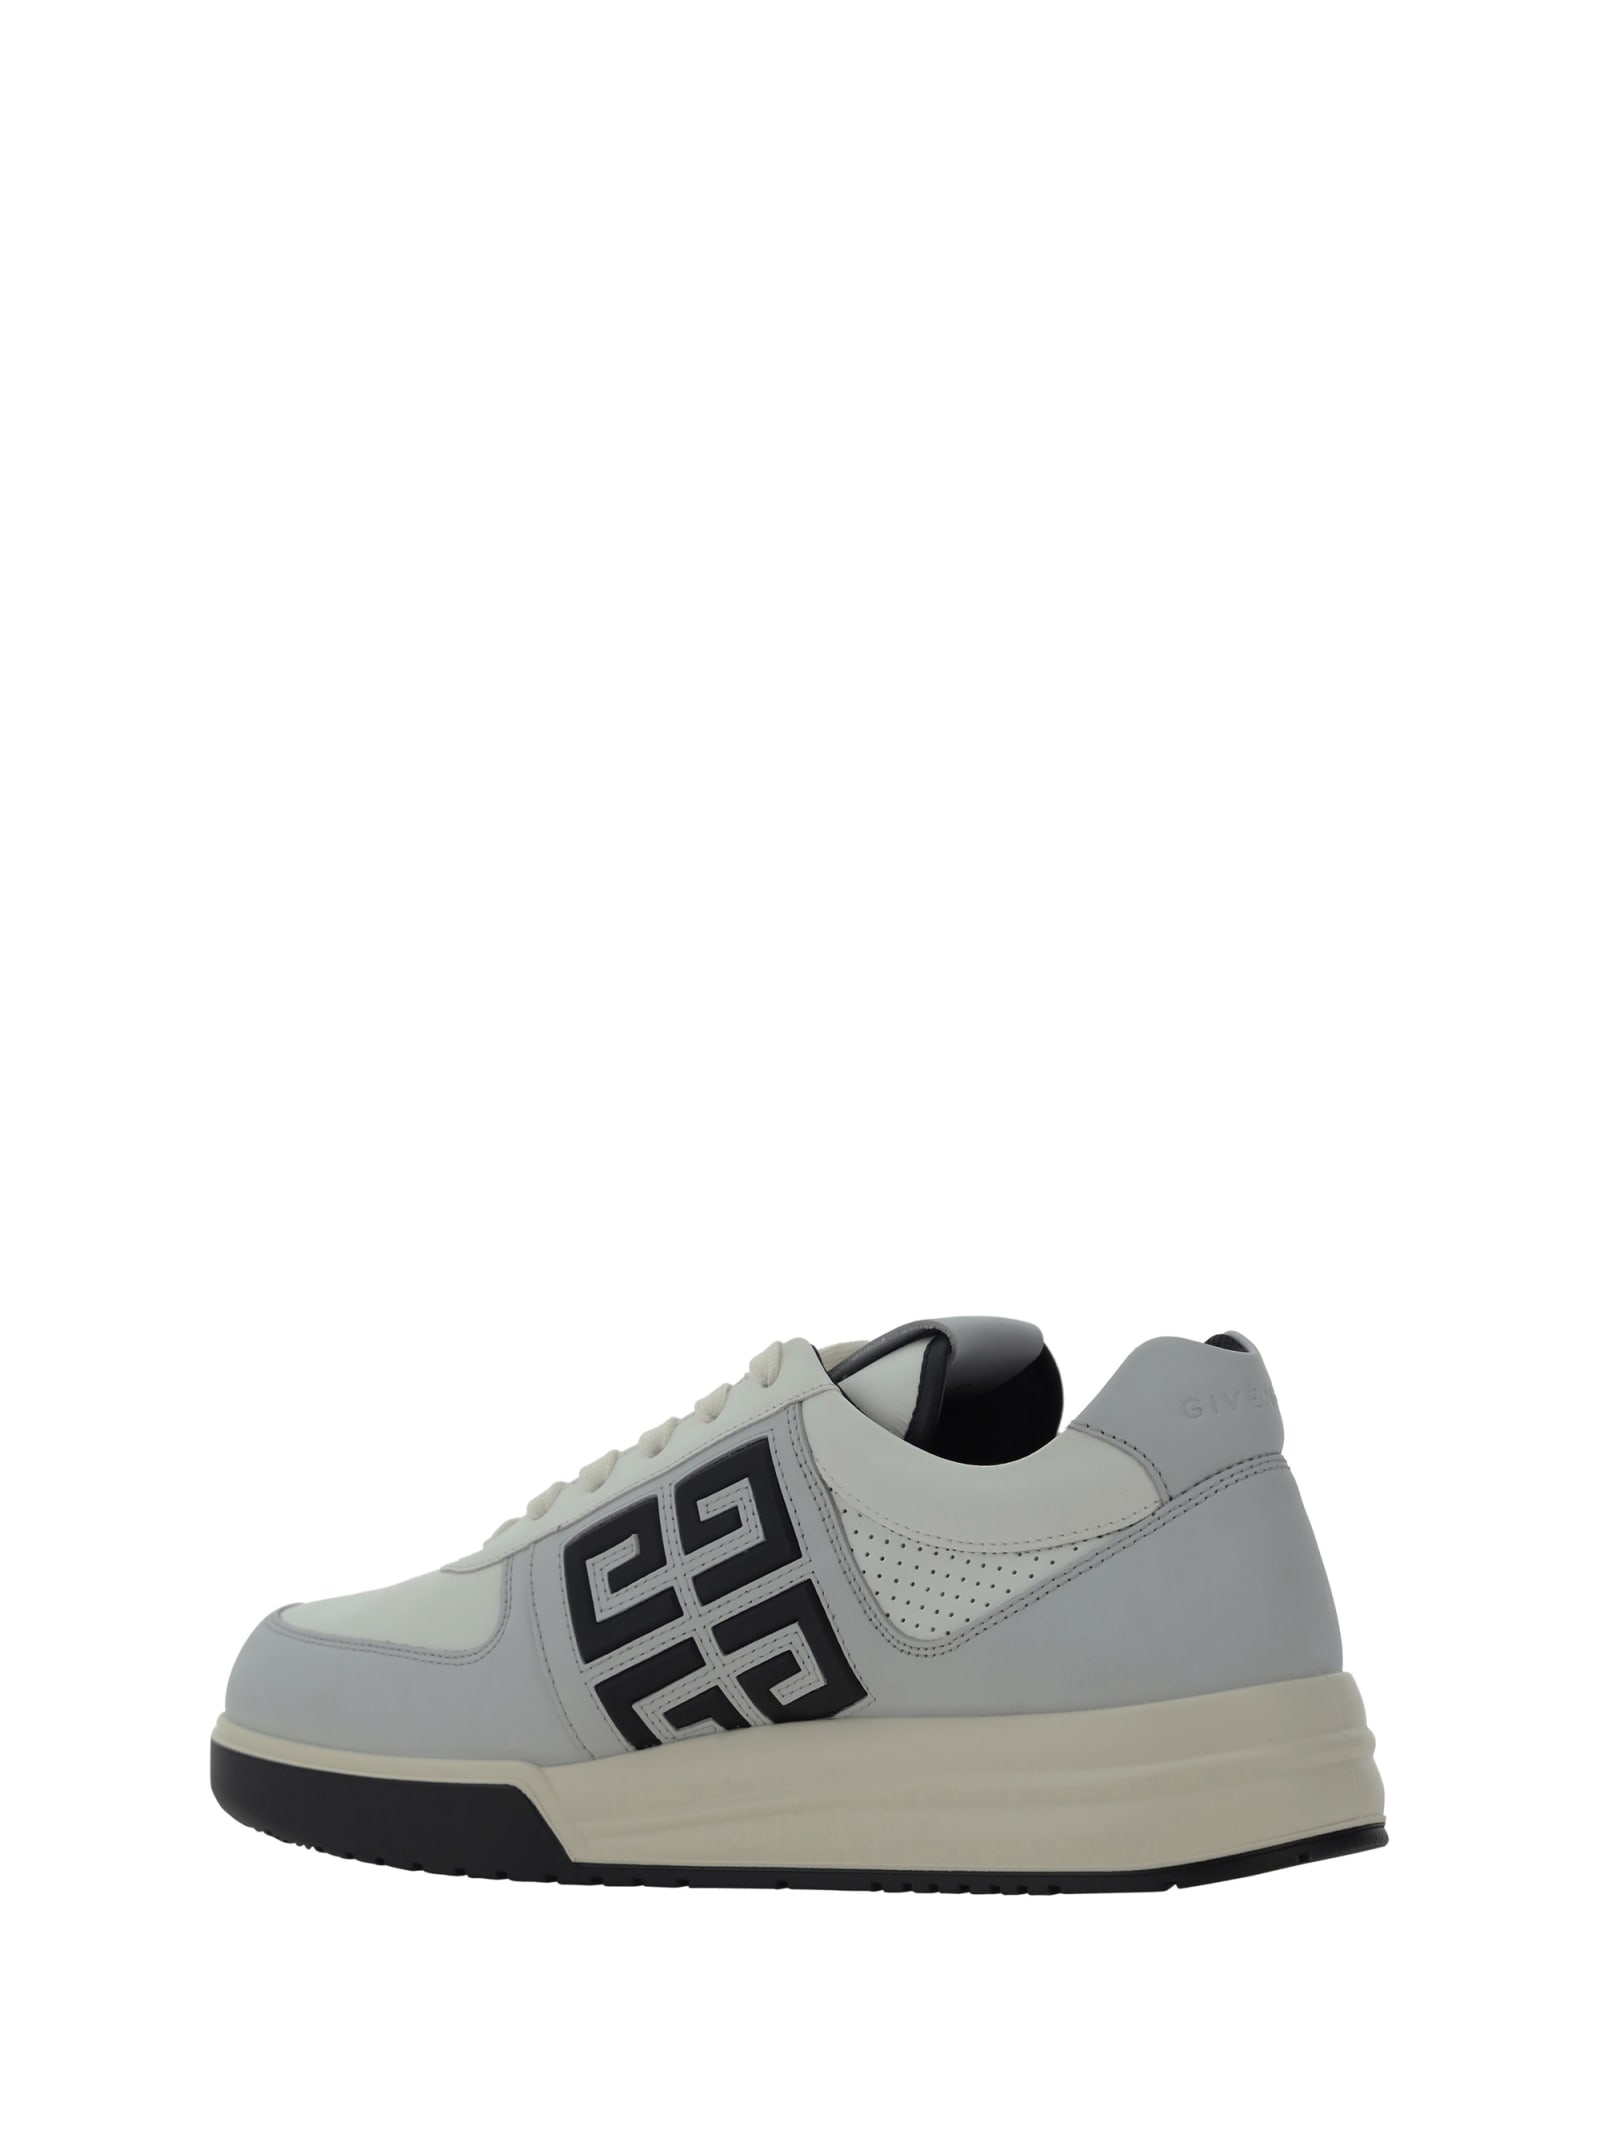 Shop Givenchy G4 Low Top Sneakers In Grey/black